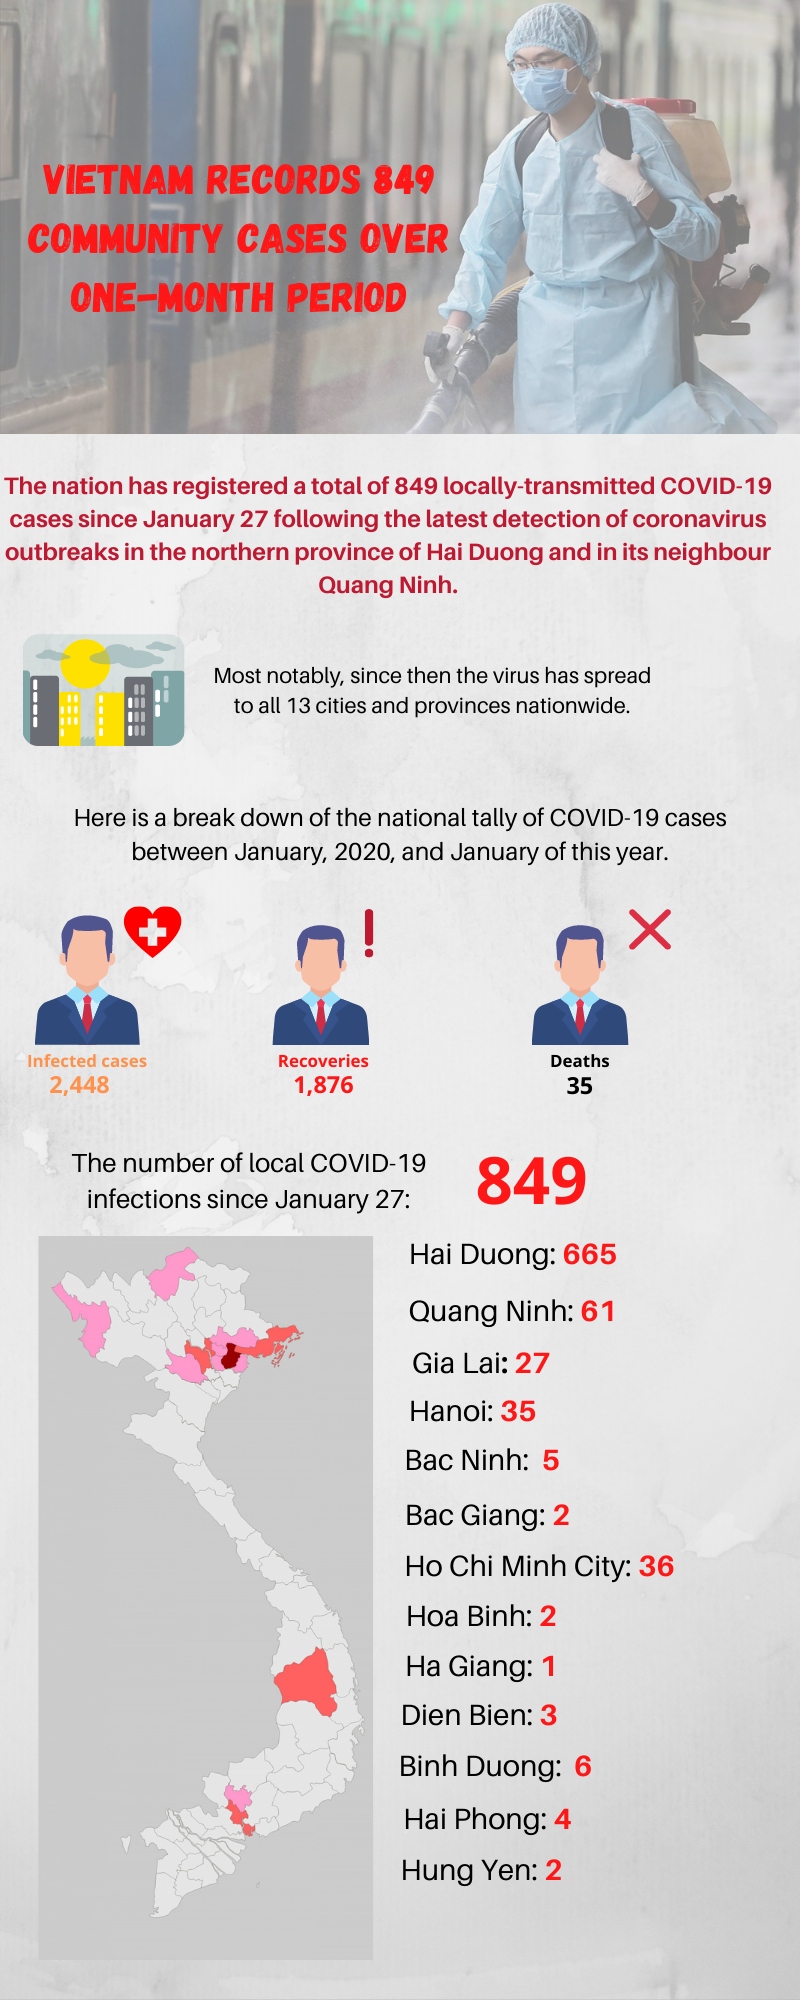 vietnam records 849 community cases over one-month period picture 1